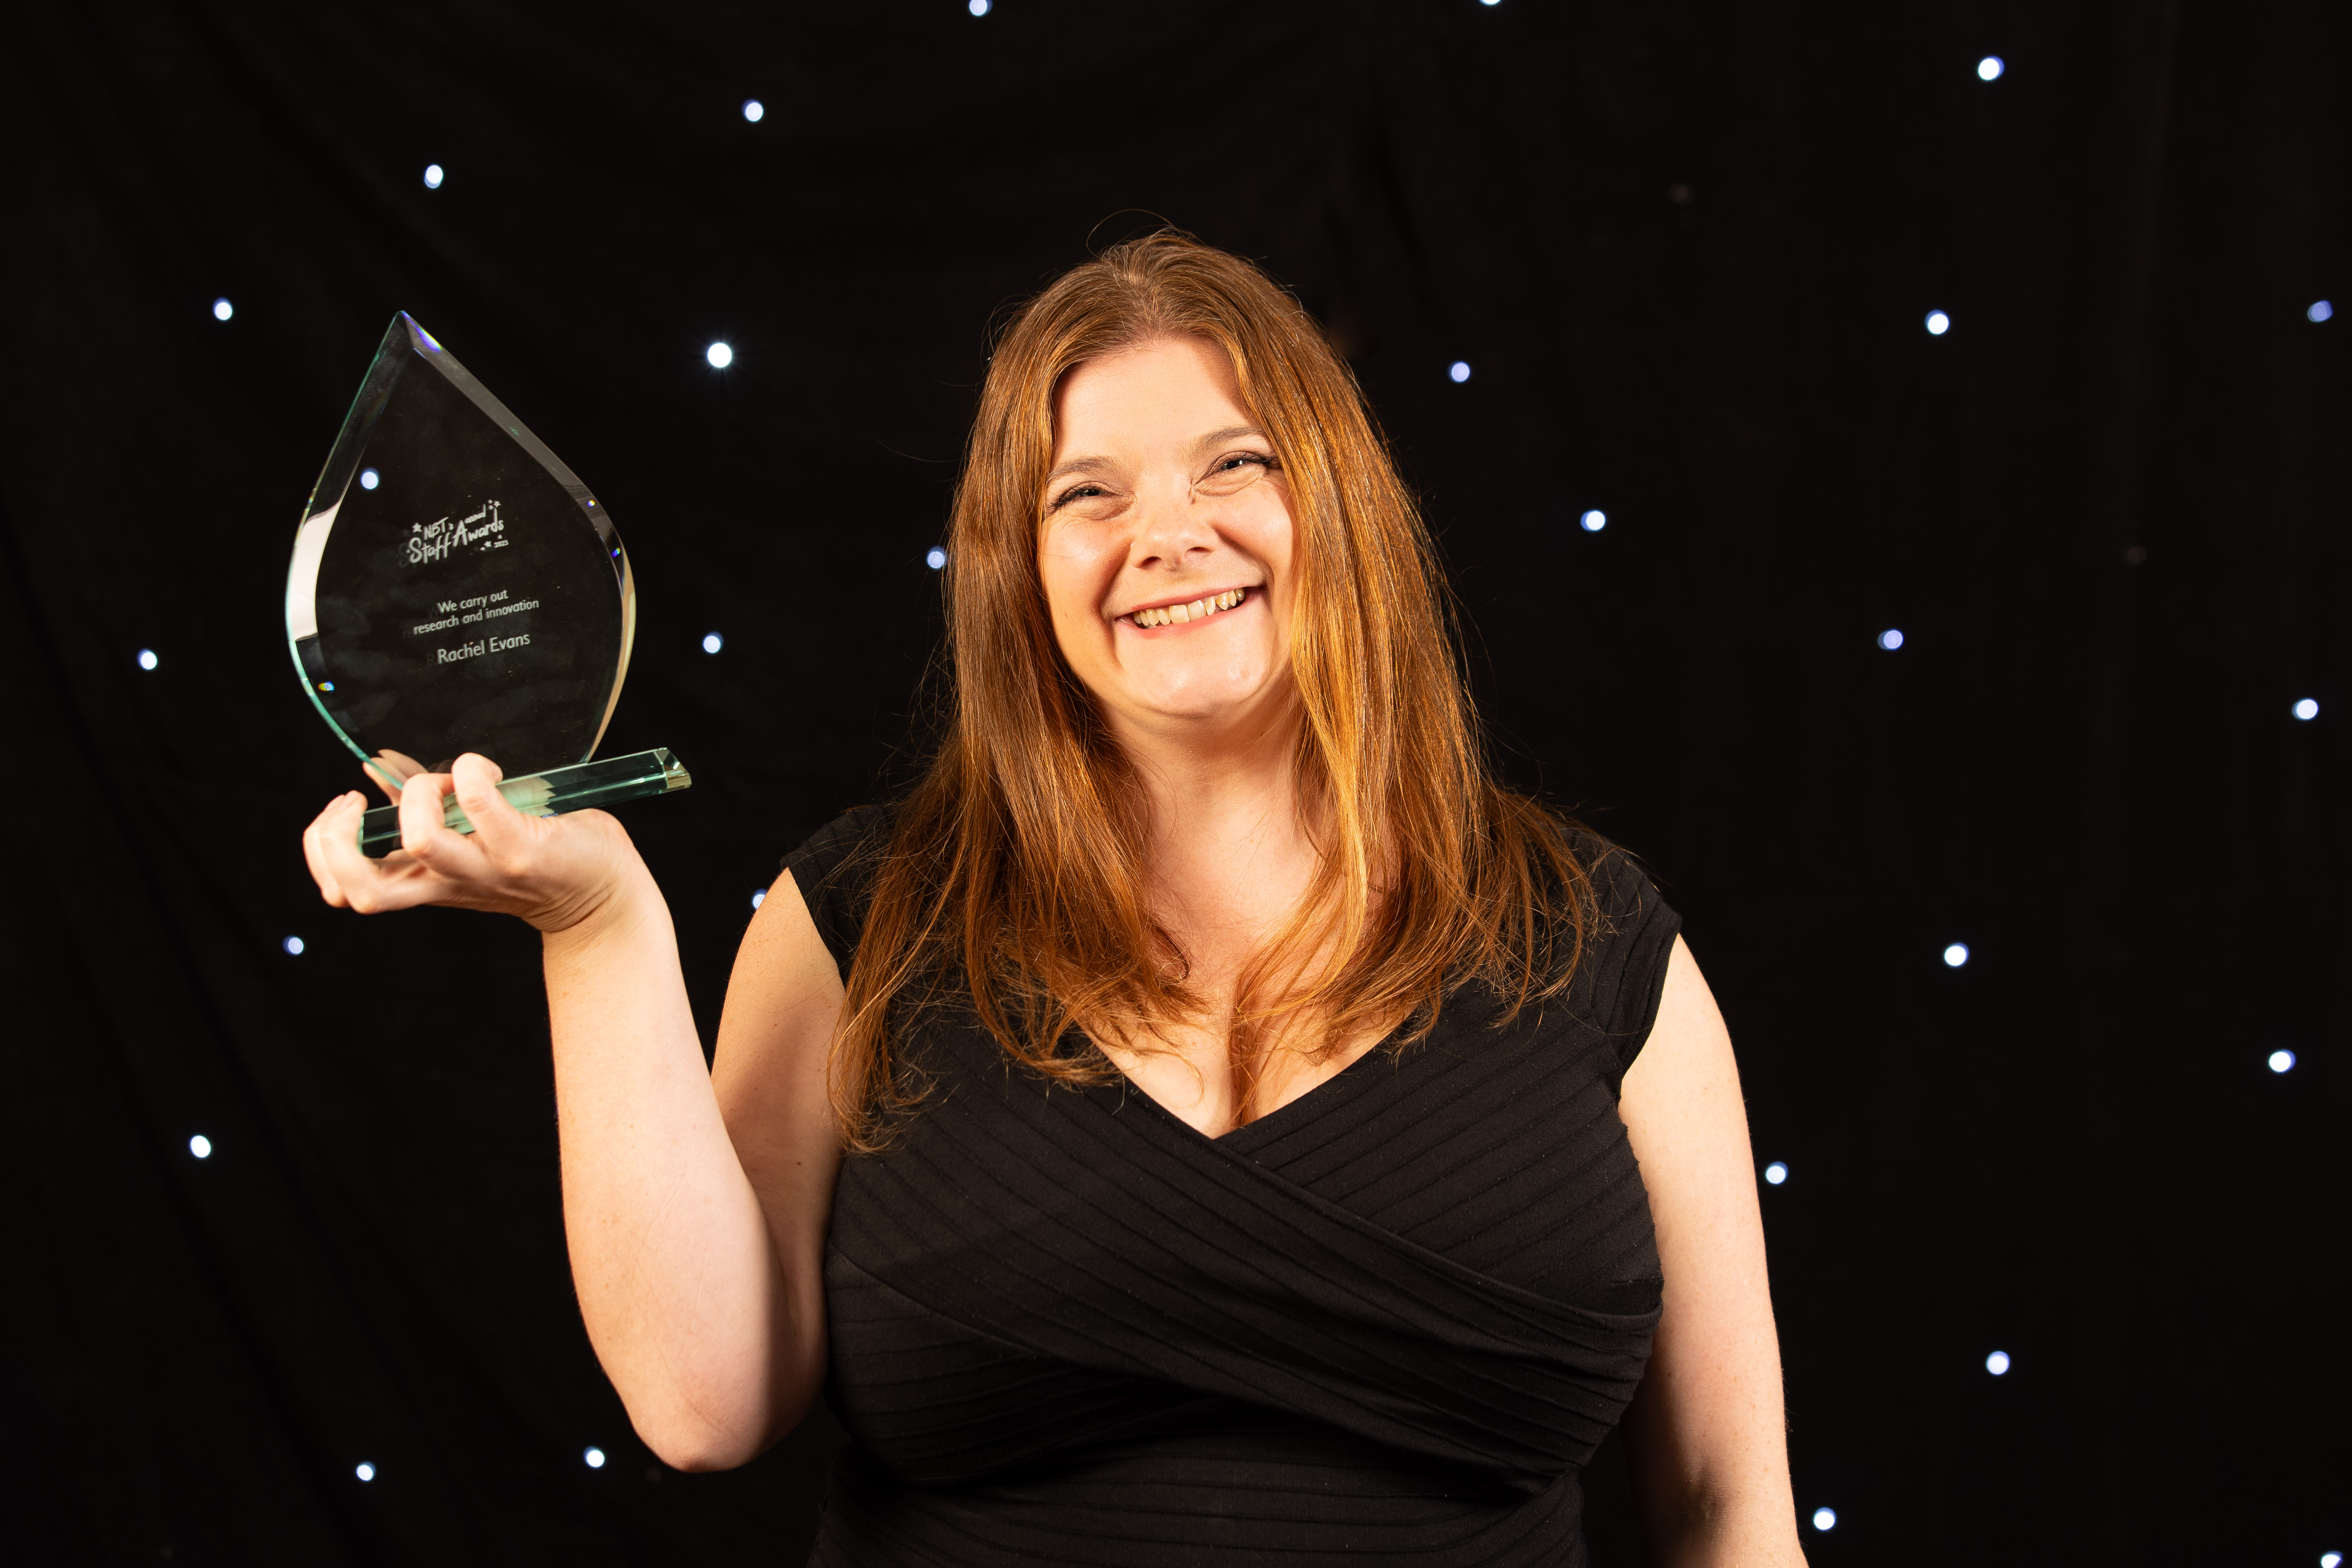 Rachel Evans, winner of the We carry out research and innovation award